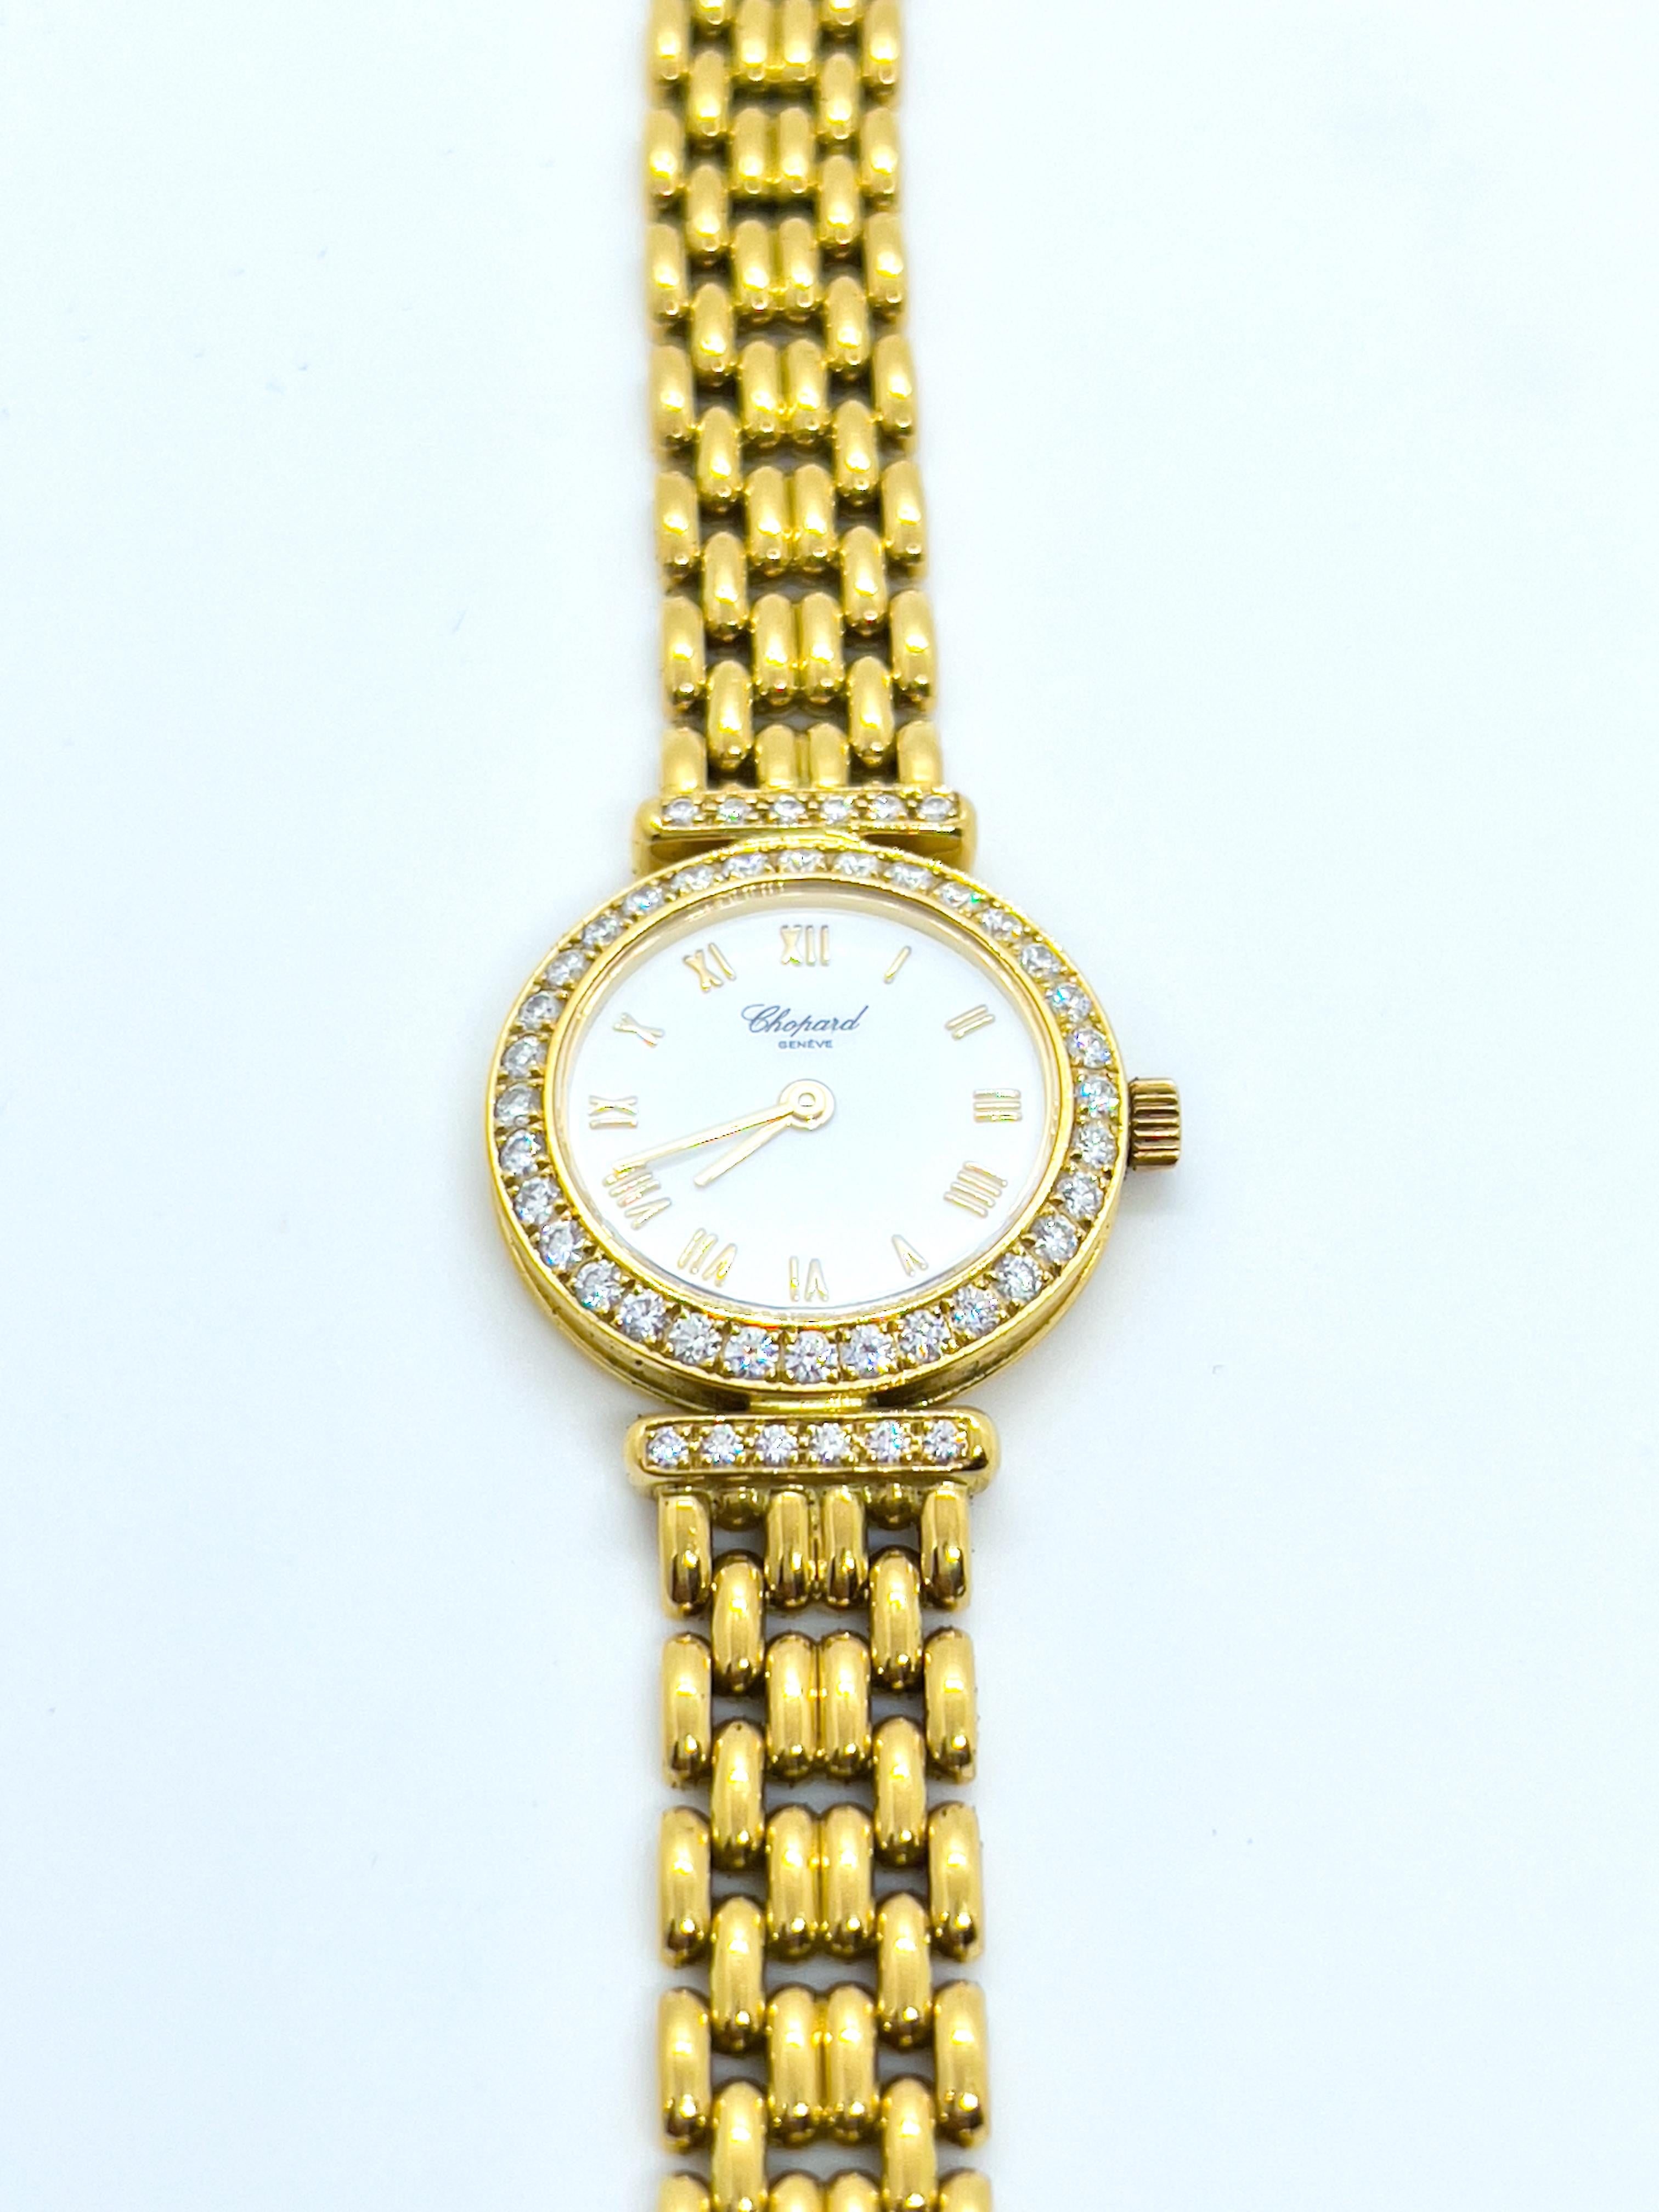 Timeless classic from Chopard. An elegant watch crafted in 18K yellow gold. White round dial with Roman numerals surrounded by round-cut white diamonds.

Total weight: 41 grams
Total length: 16 cm 
Movement: quartz